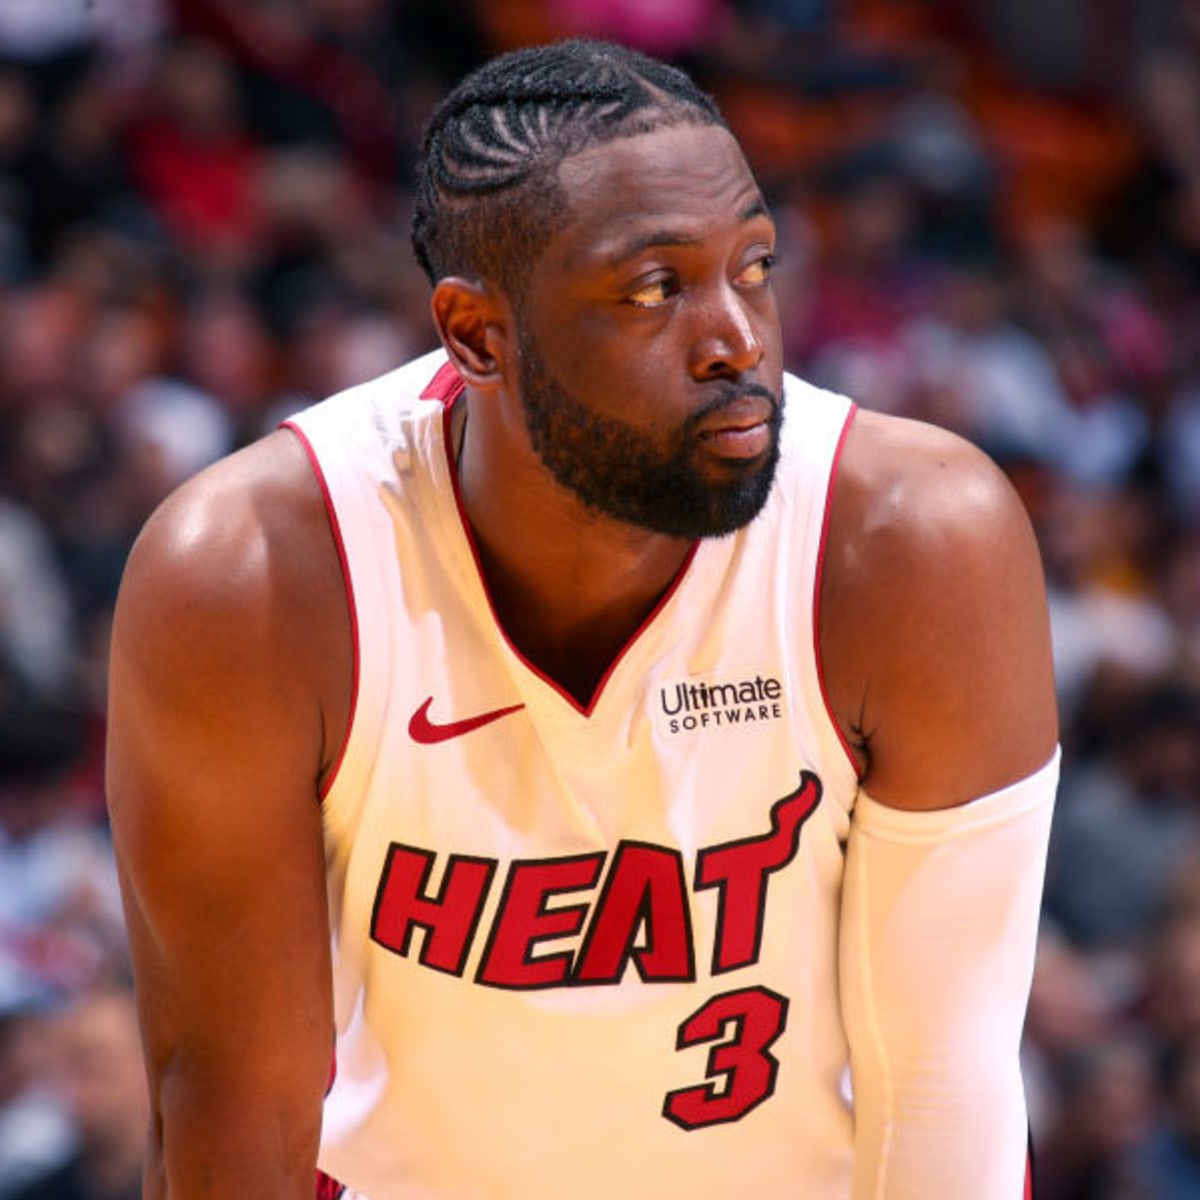 Dwyane Wade Says He'll Be in Therapy to Fill Void of NBA